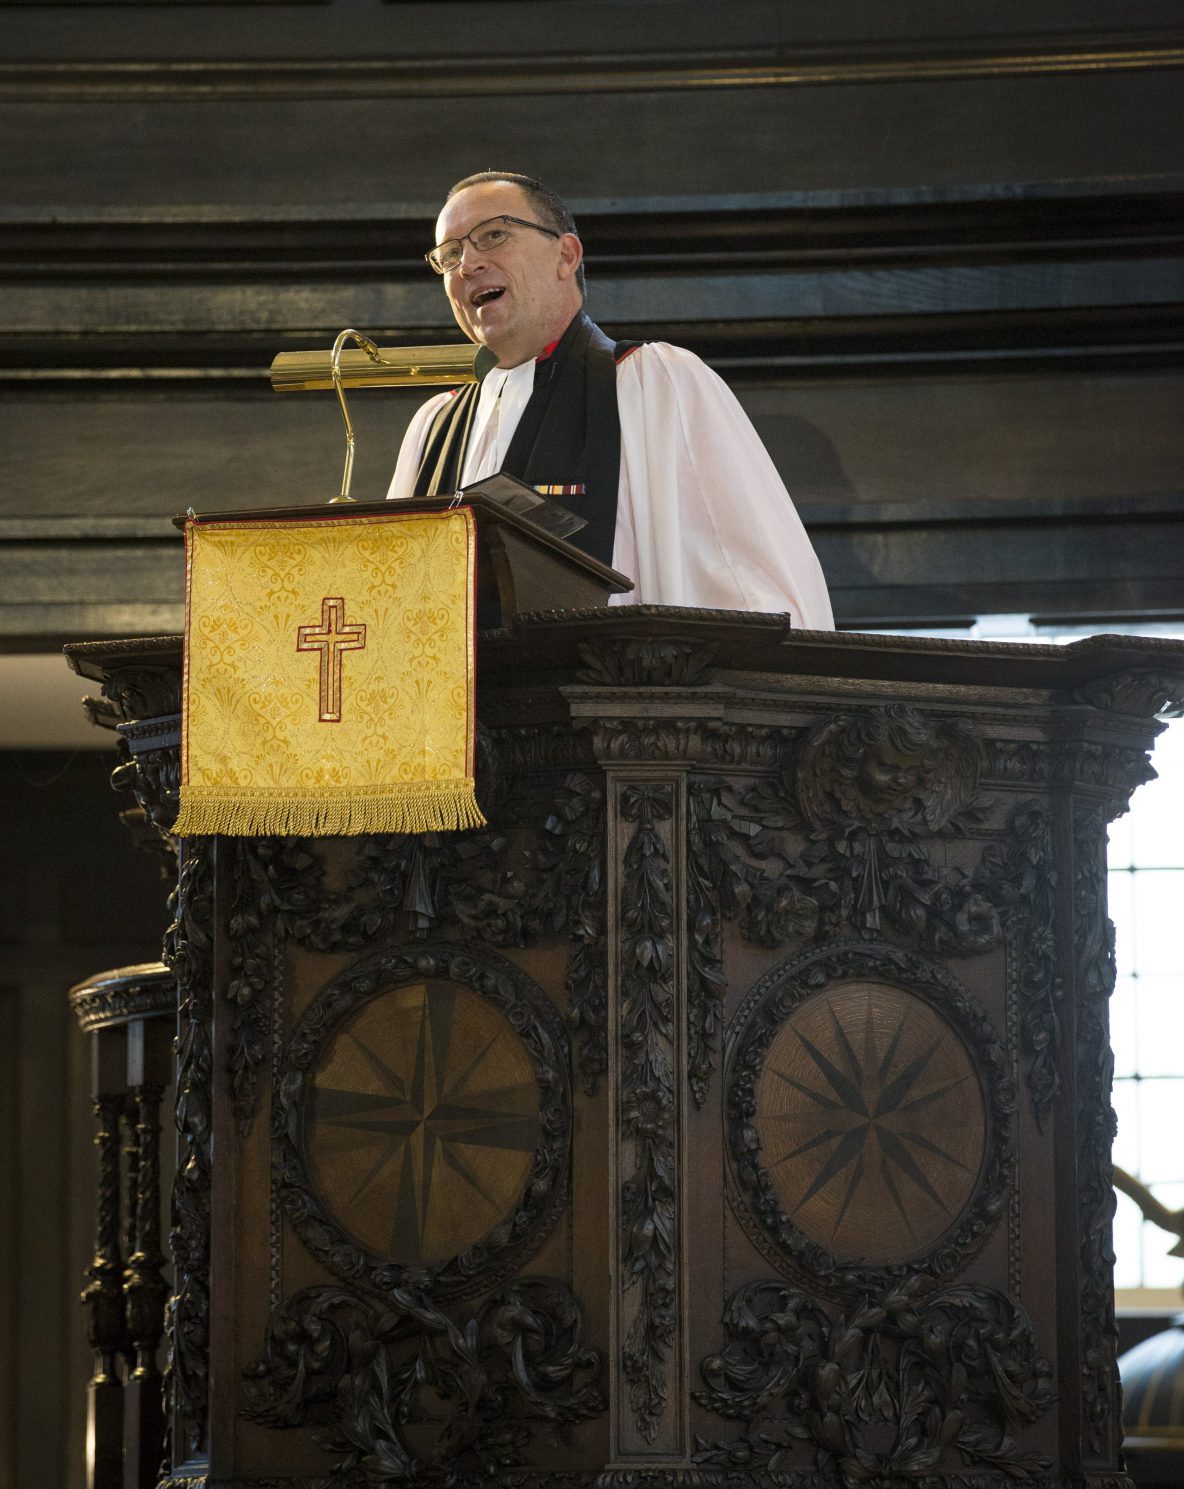 David in the Pulpit